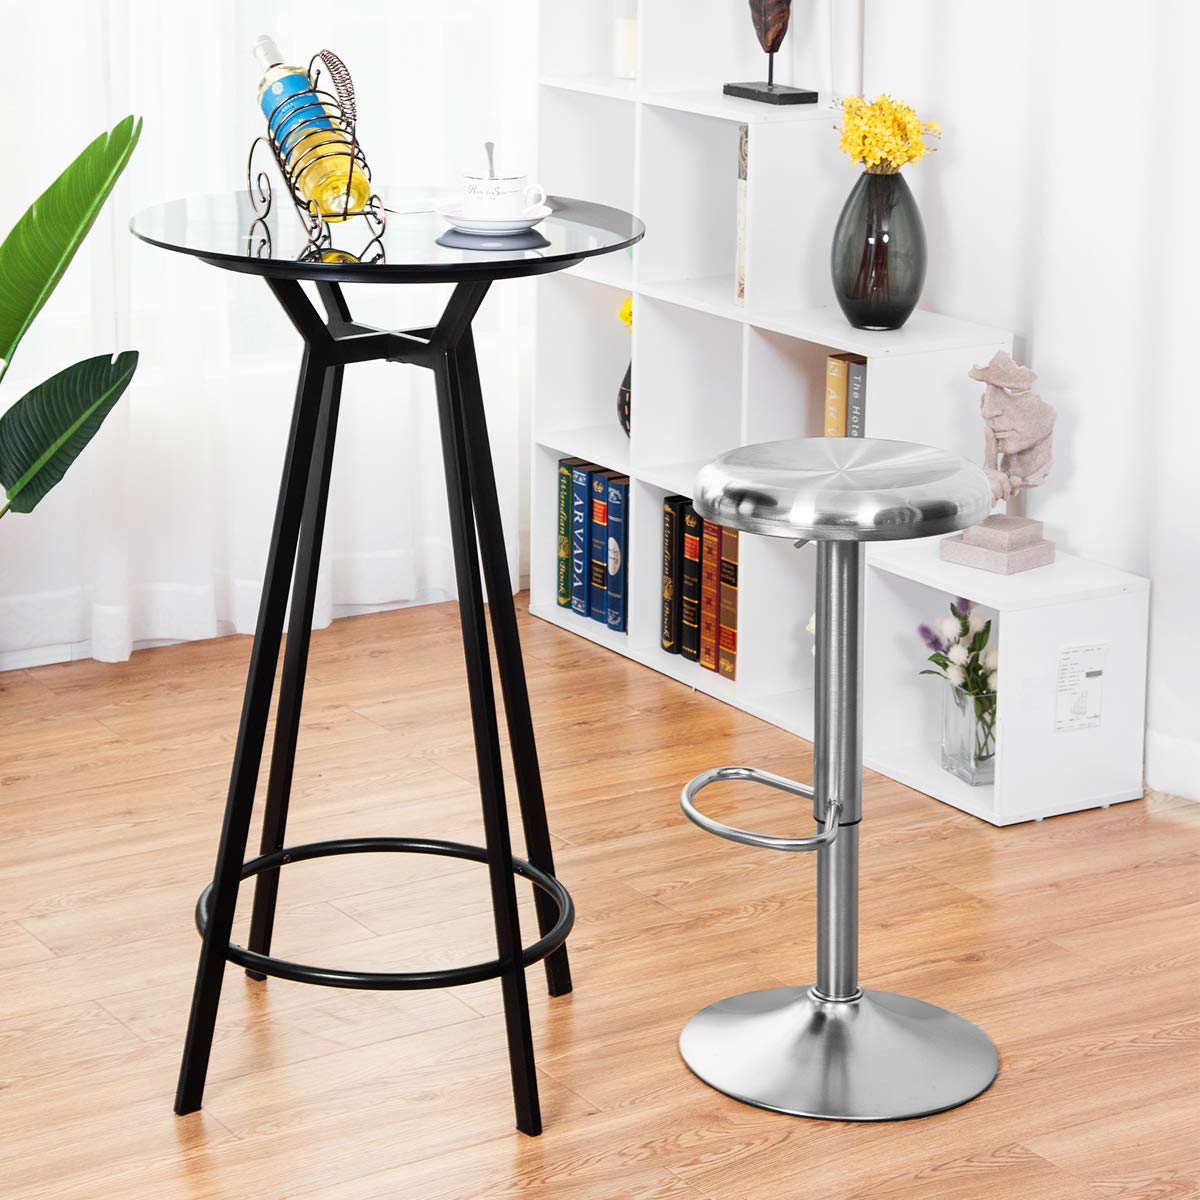 Modern Swivel Adjustable Height Barstool with Footrest, Stainless Steel Round Top Bar Height Barstools for Pub Bistro Kitchen Dining